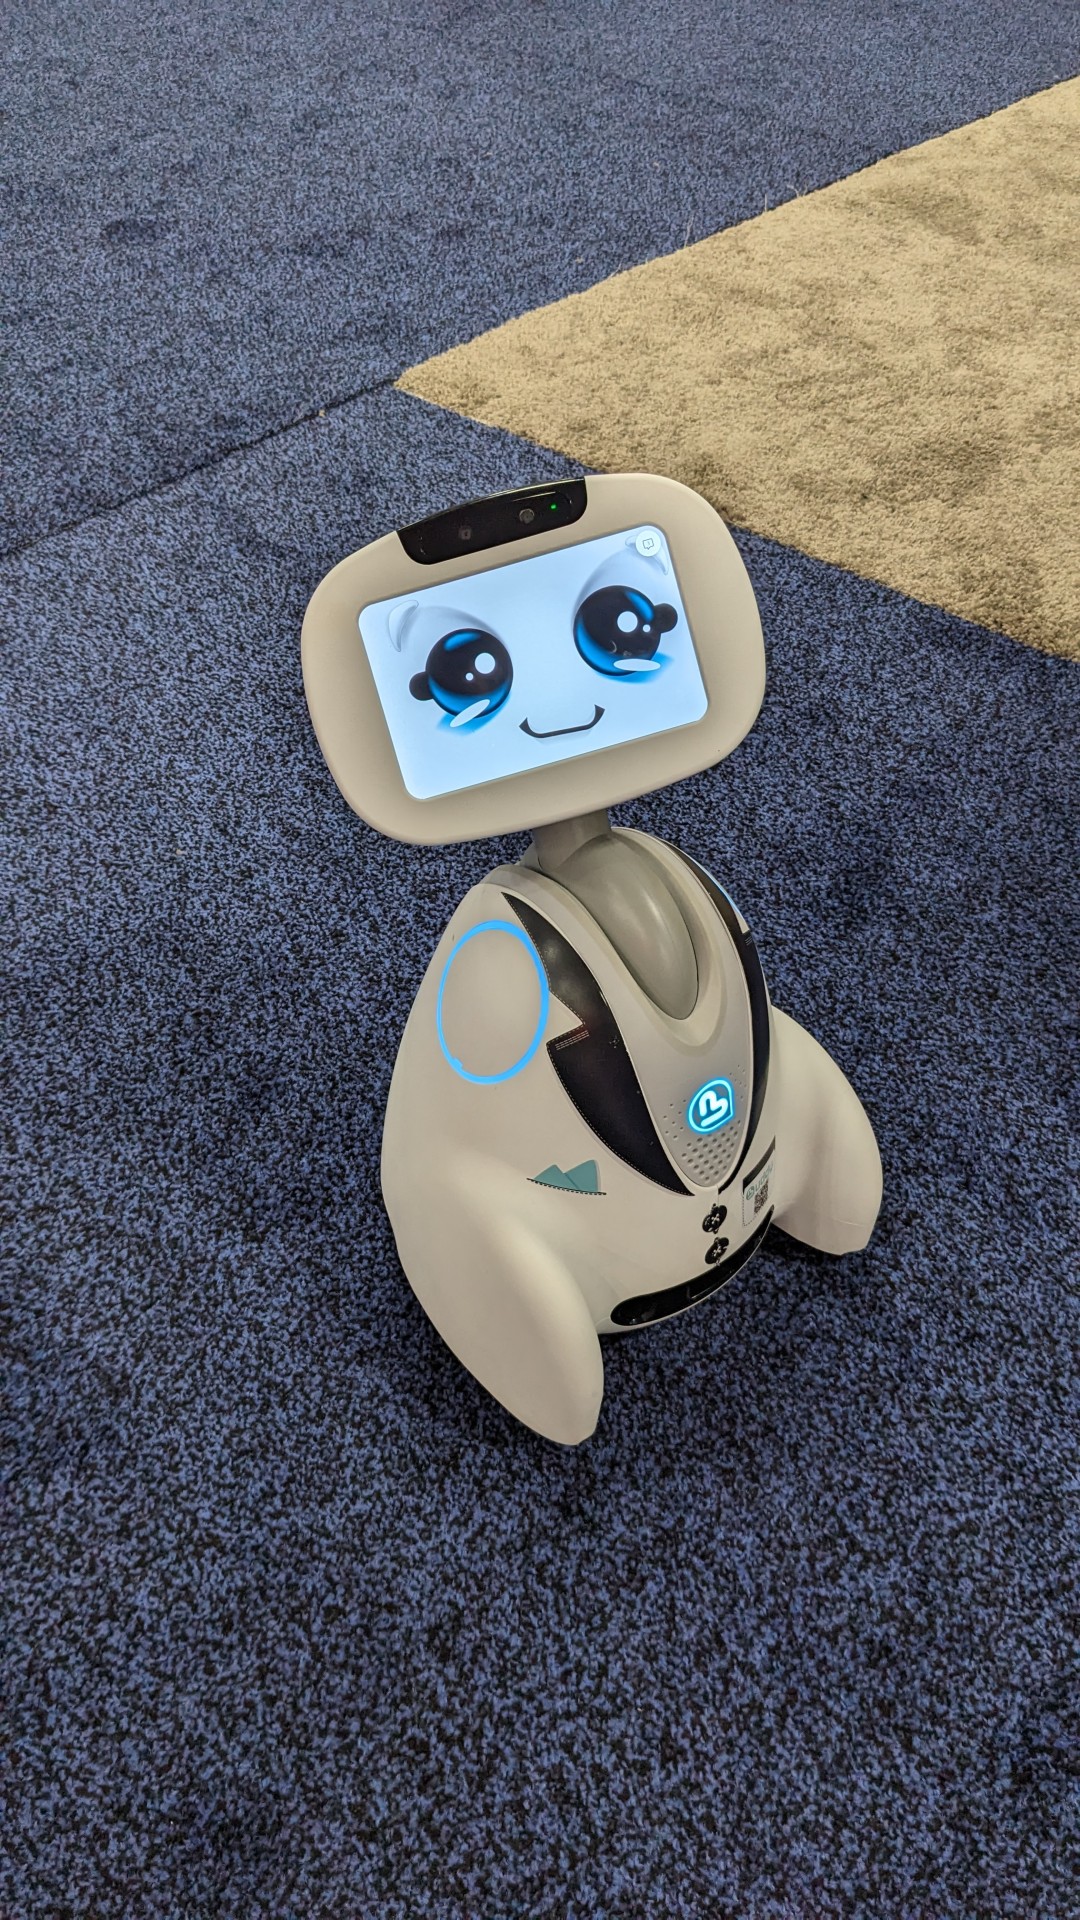 A toy robot is sitting on the floor.